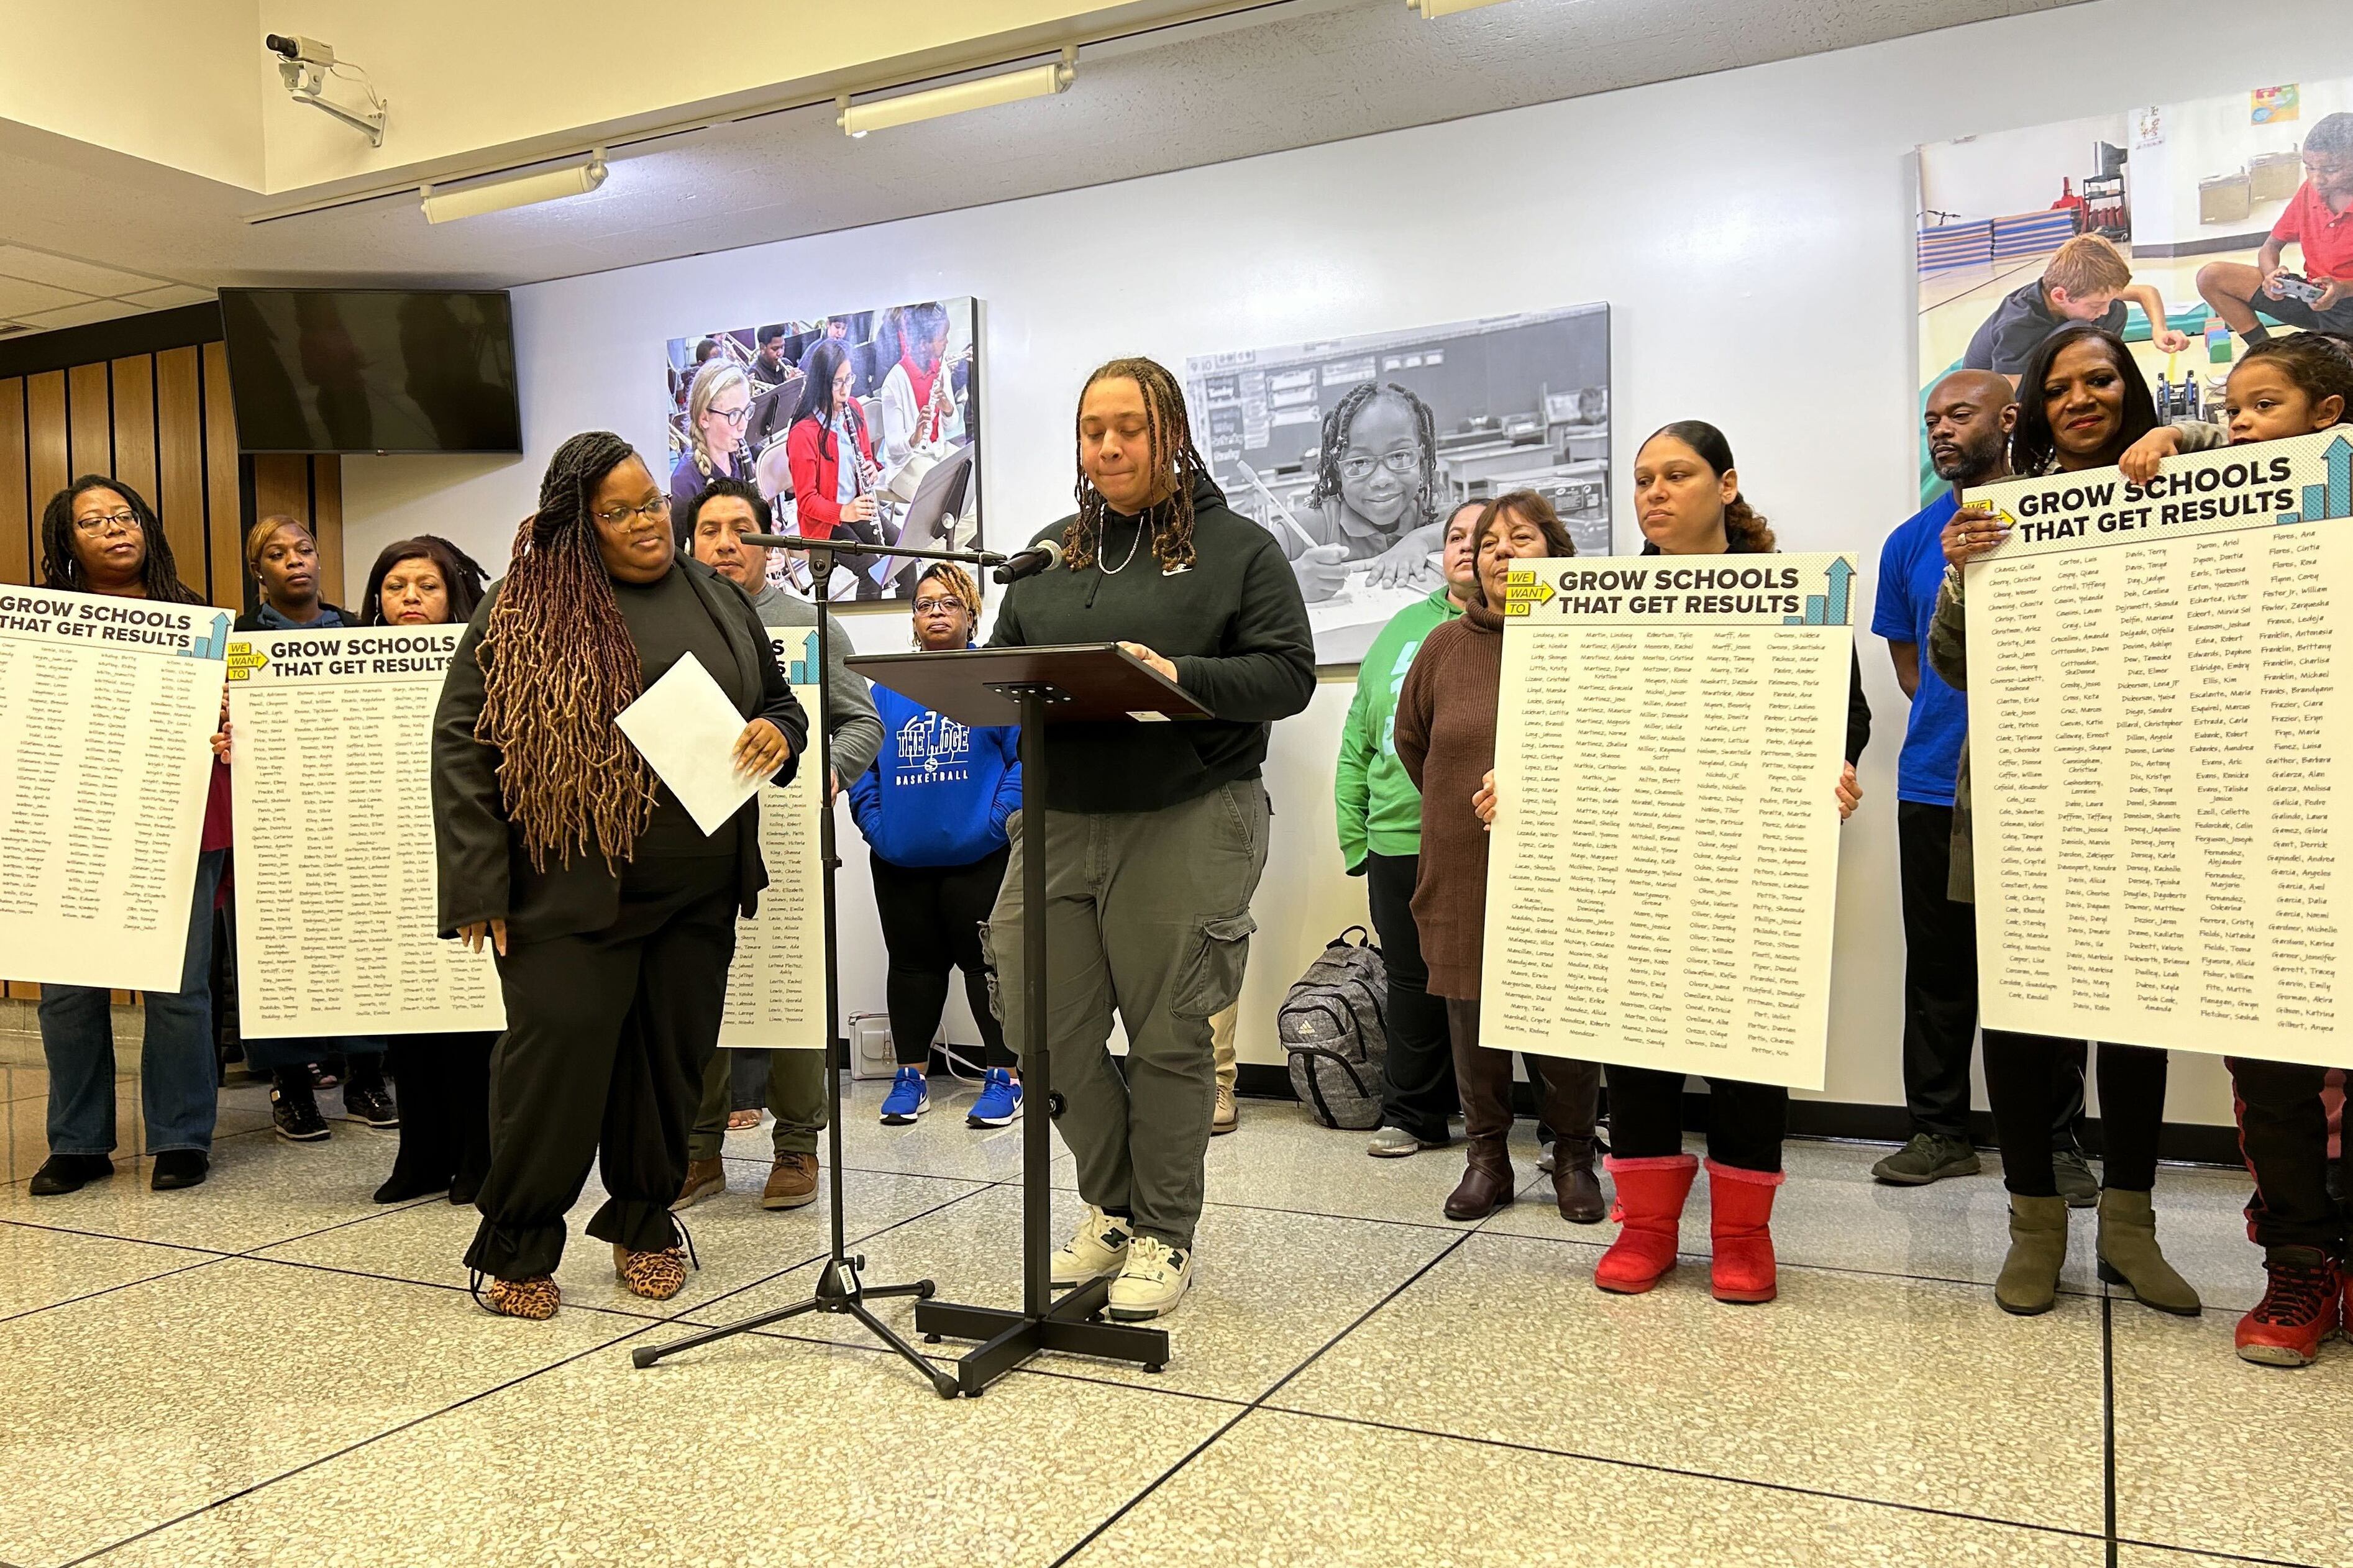 A student with long braids and wearing a black sweater stands at a podium while a group of people stand in the background holding up signs.